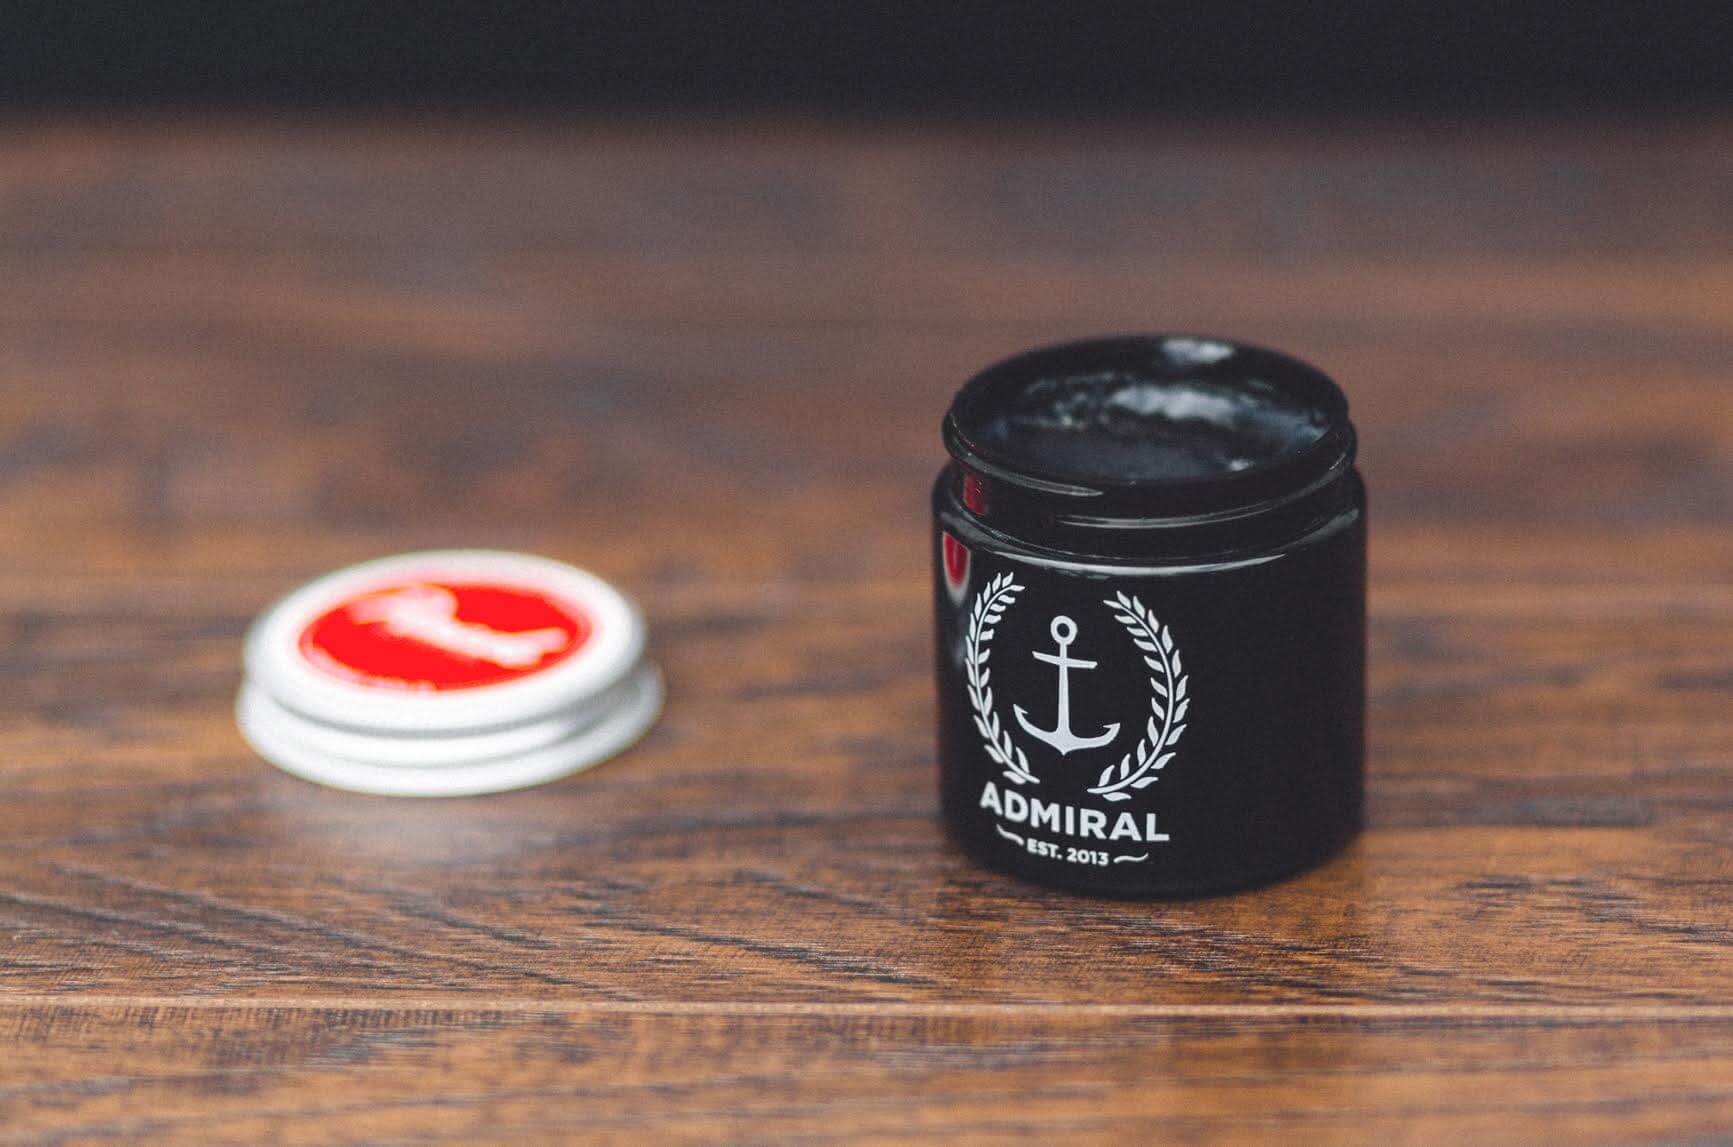 The Pomade Don Draper Wished he Used - Admiral 